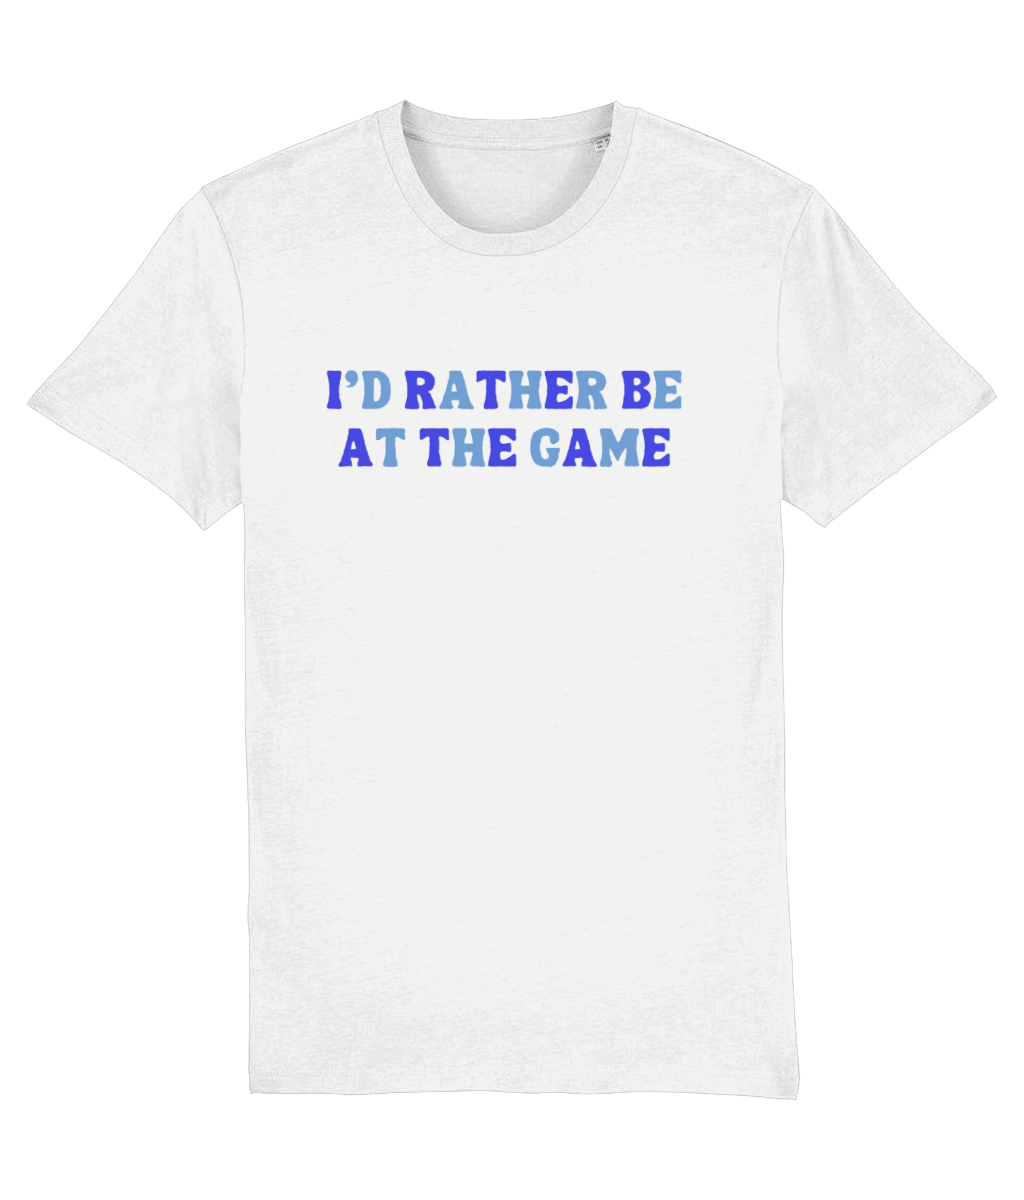 I'd Rather Be At The Game Retro T-Shirt